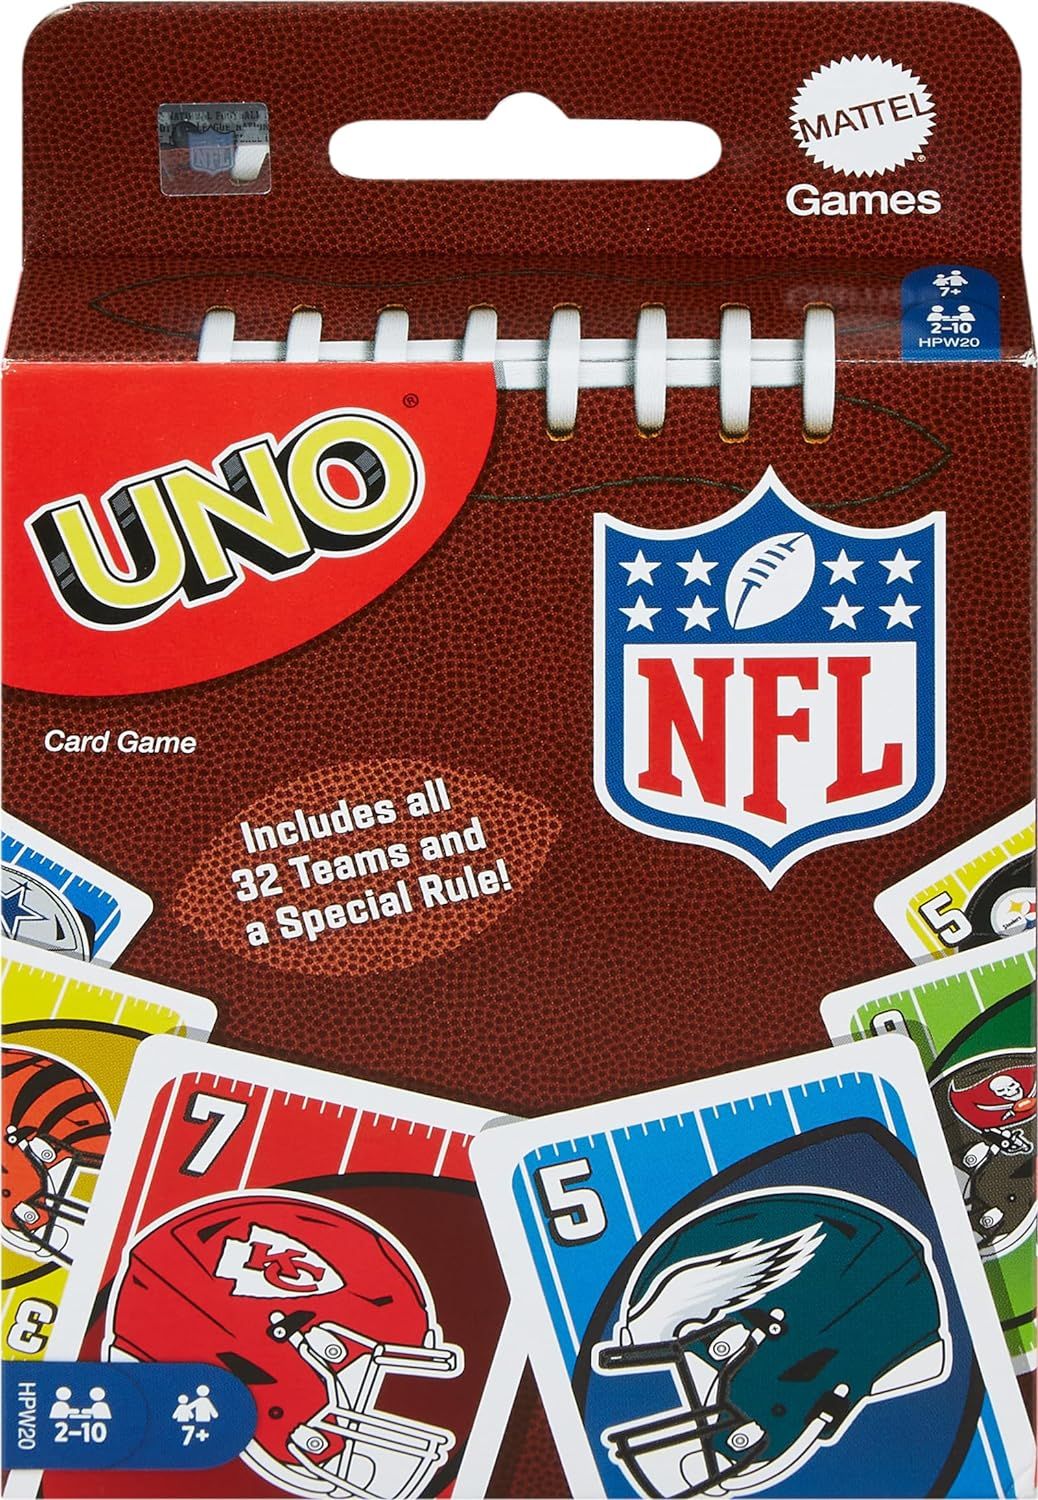 Mattel Games UNO NFL Card Game in Storage & Travel Tin for Kids, Adults & Family Night, Features ... | Amazon (US)